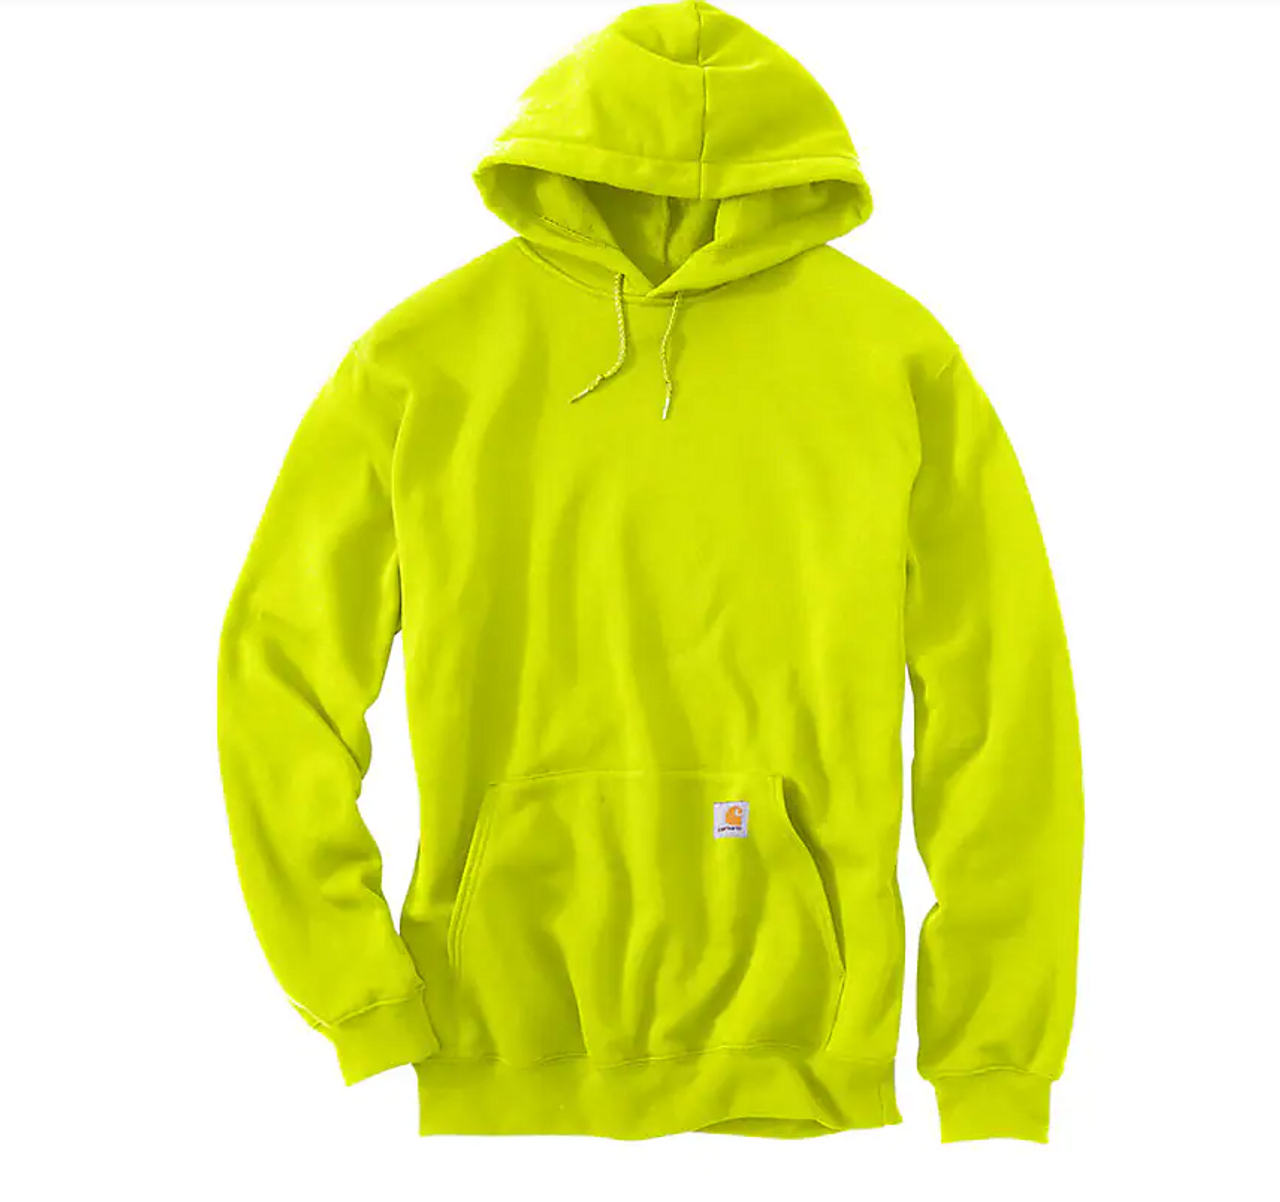 https://cdn11.bigcommerce.com/s-s7ib93jl4n/images/stencil/1280x1280/products/45119/52953/k121-carhartt-mens-loose-fit-midweight-sweatshirt-blm-bright-lime__19672.1644426250.png?c=2?imbypass=on